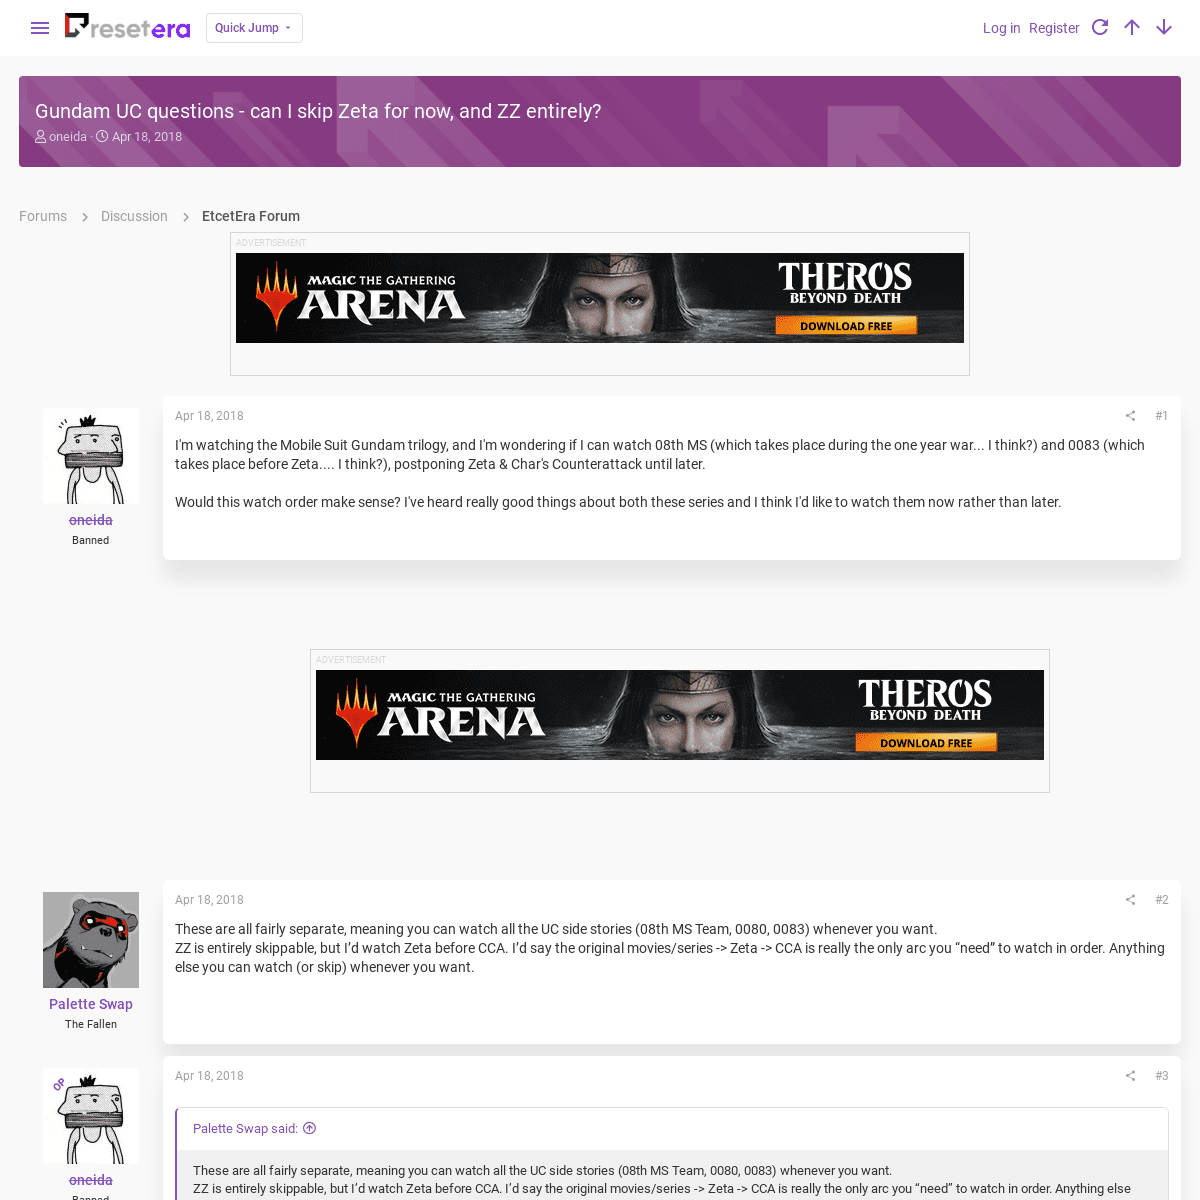 A complete backup of https://www.resetera.com/threads/gundam-uc-questions-can-i-skip-zeta-for-now-and-zz-entirely.37038/